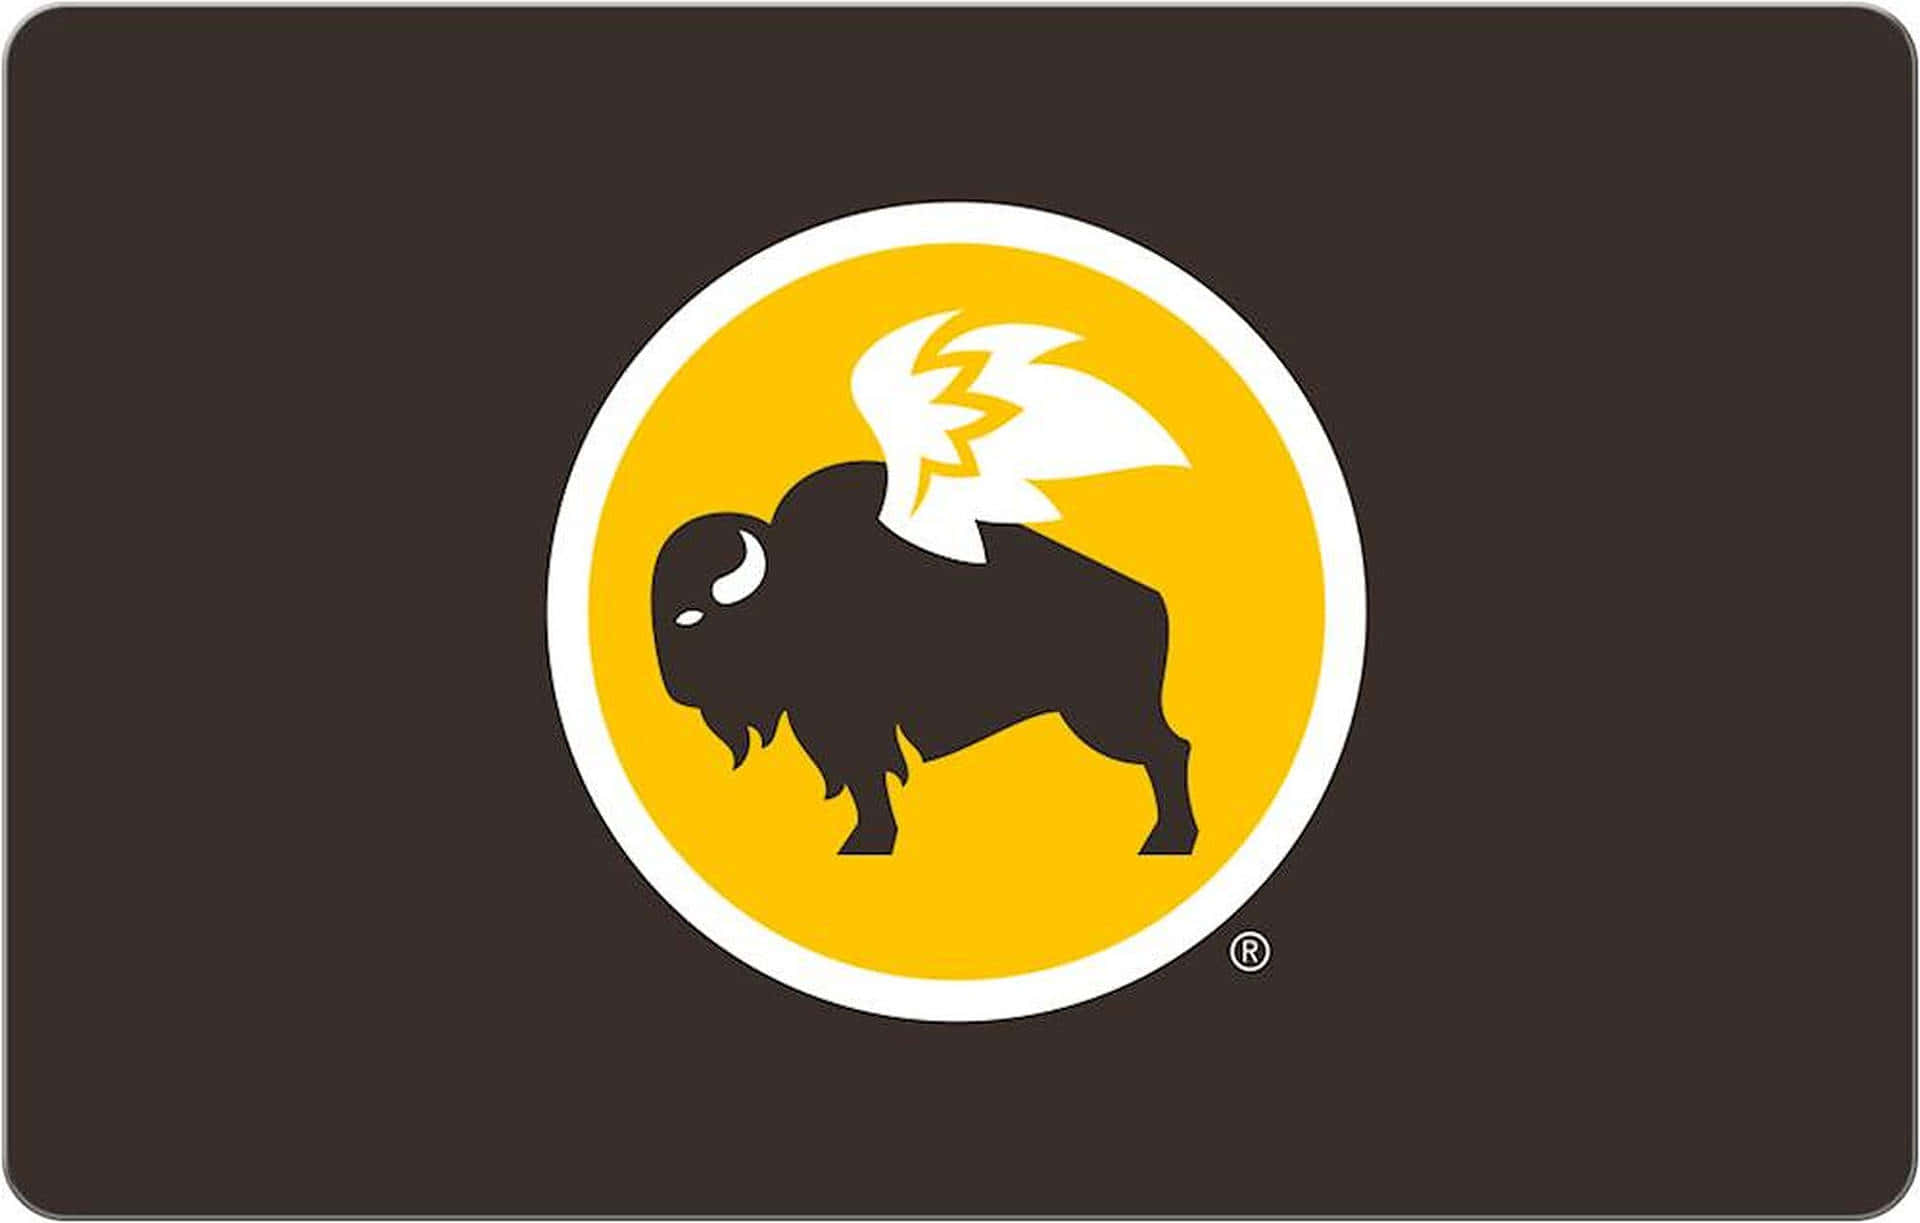 Enjoy classic American wings and more with Buffalo Wild Wings!